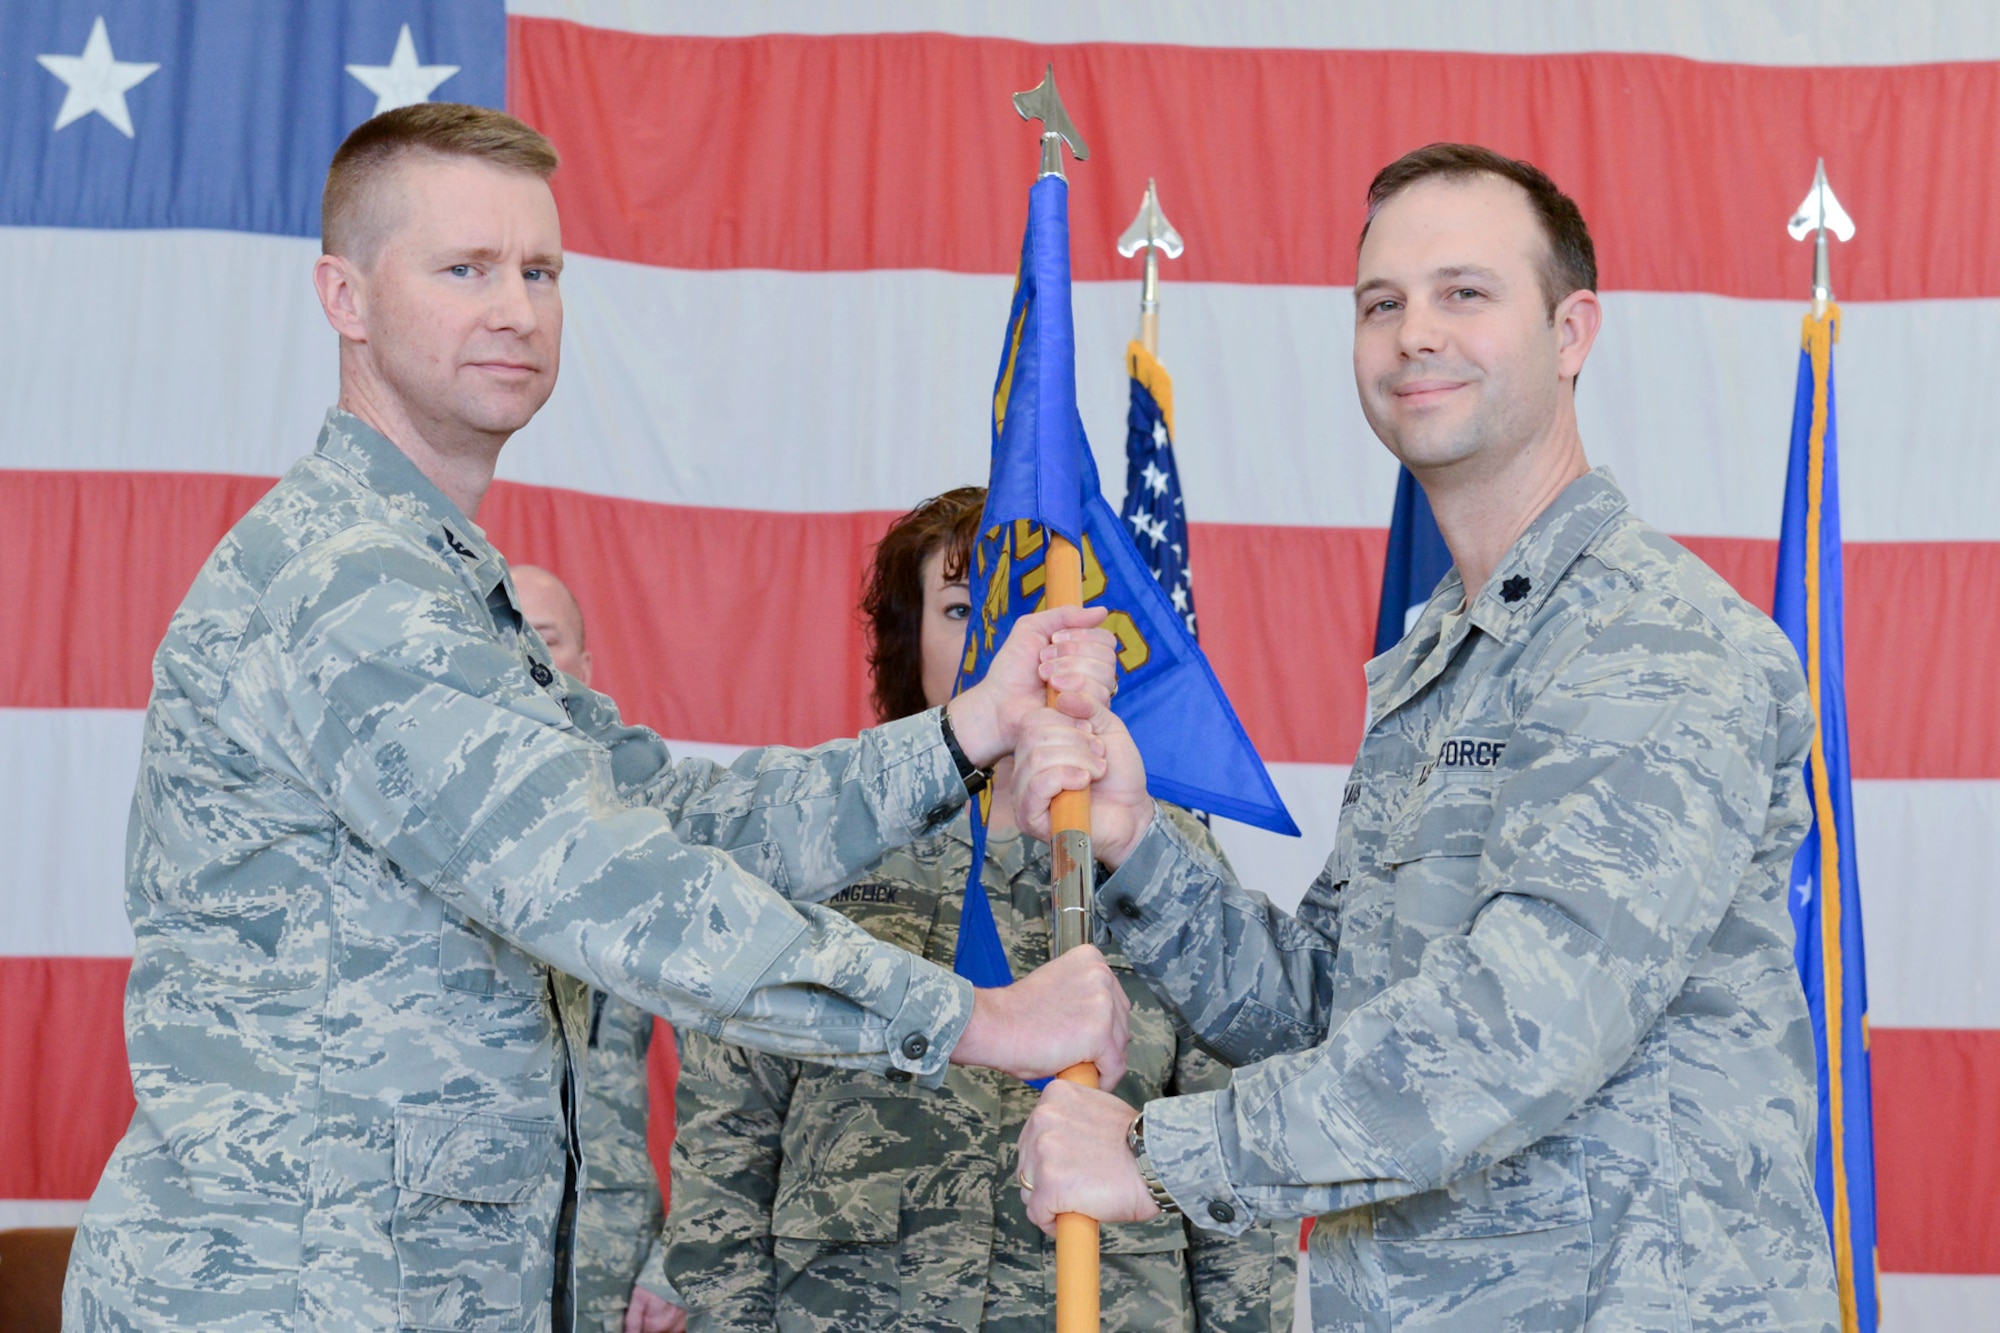 Col. Mark Chidley (left), 132d Wing (132WG), Des Moines, Iowa  Intelligence Surveillance Reconnaissance Group (ISRG) Commander, passes the 232d Intelligence Squadron (232 IS) guidon to Lt. Col. Brian Claus (right), 232 IS Commander, during the 132WG ISRG Activation Ceremony held in the 132WG Fire House on Saturday, March 7, 2015.  This ceremony formally recognizes the official activation of the 132WG ISRG.  (U.S. Air National Guard photo by Staff Sgt. Linda K. Burger/Released)